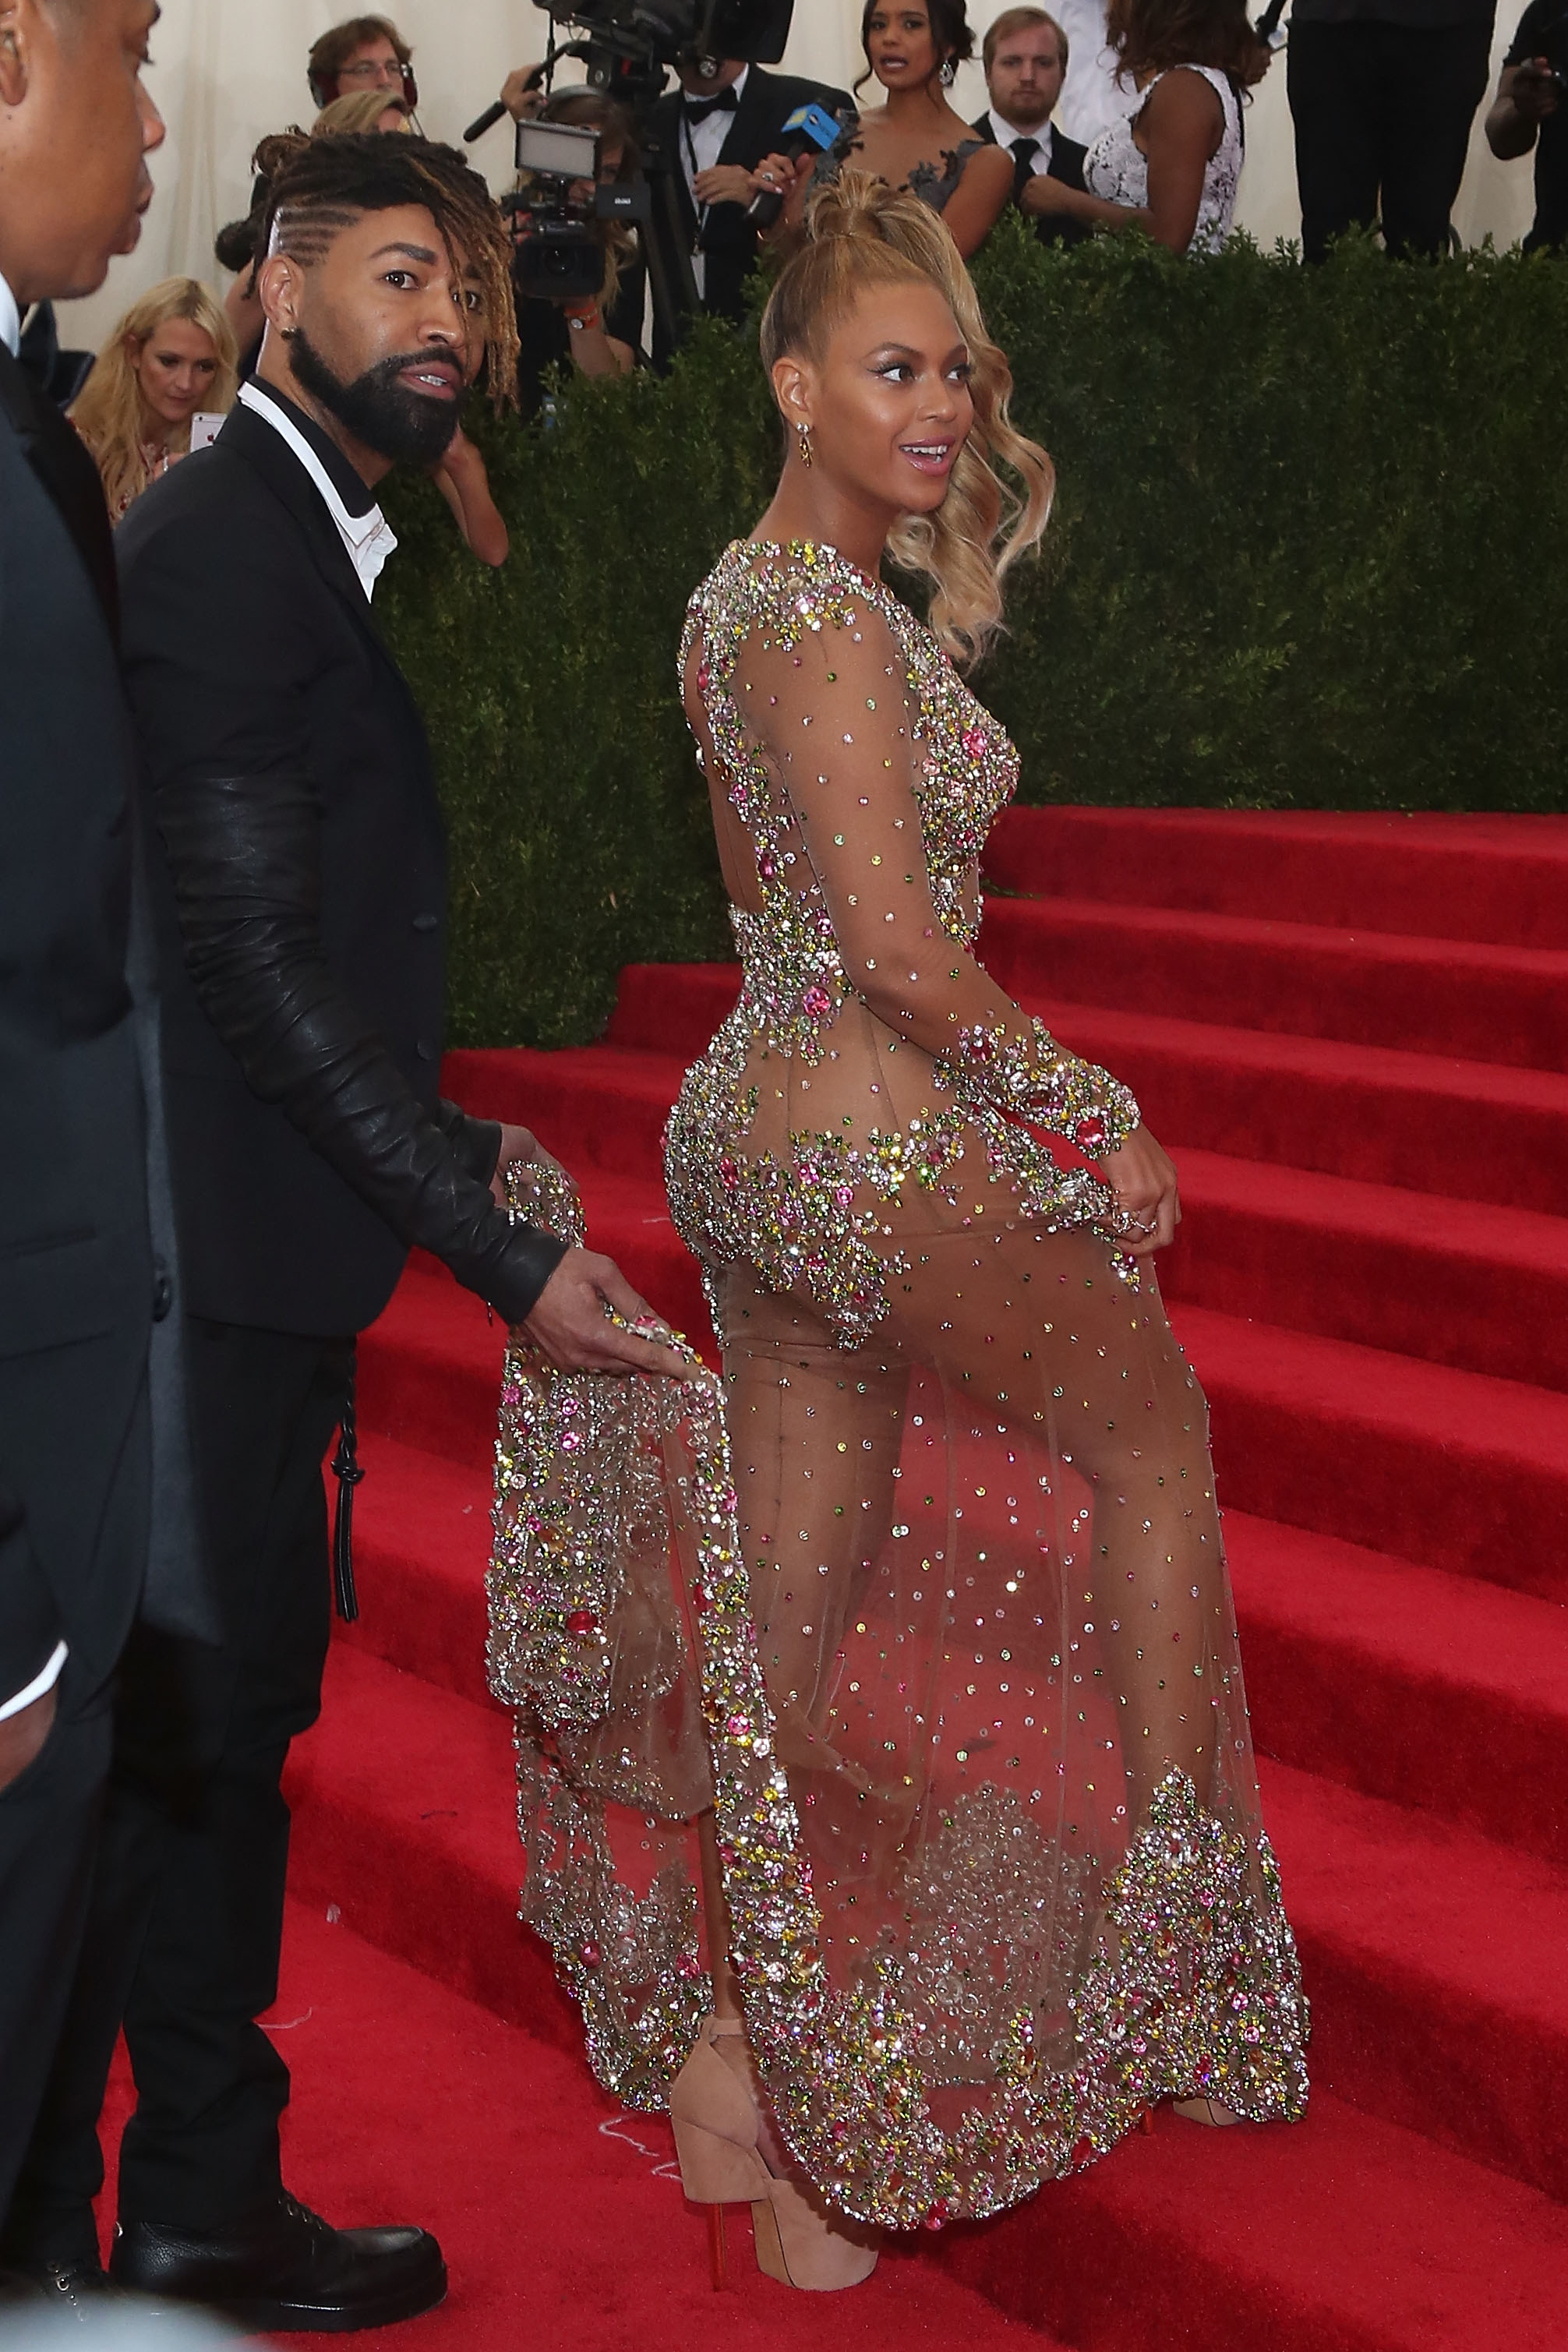 Jay Z, Beyonce, and Ty Hunter attend "China: Through the Looking Glass", the 2015 Costume Institute Gala, at Metropolitan Museum of Art